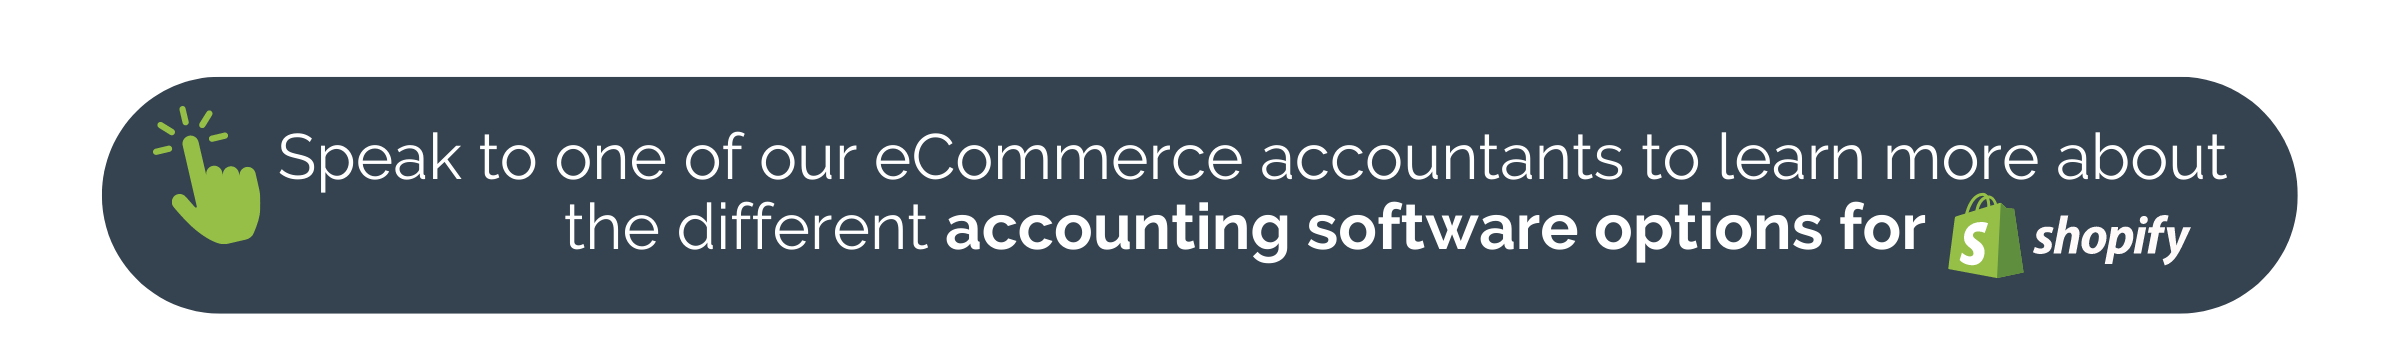 Shopify-accounting-software